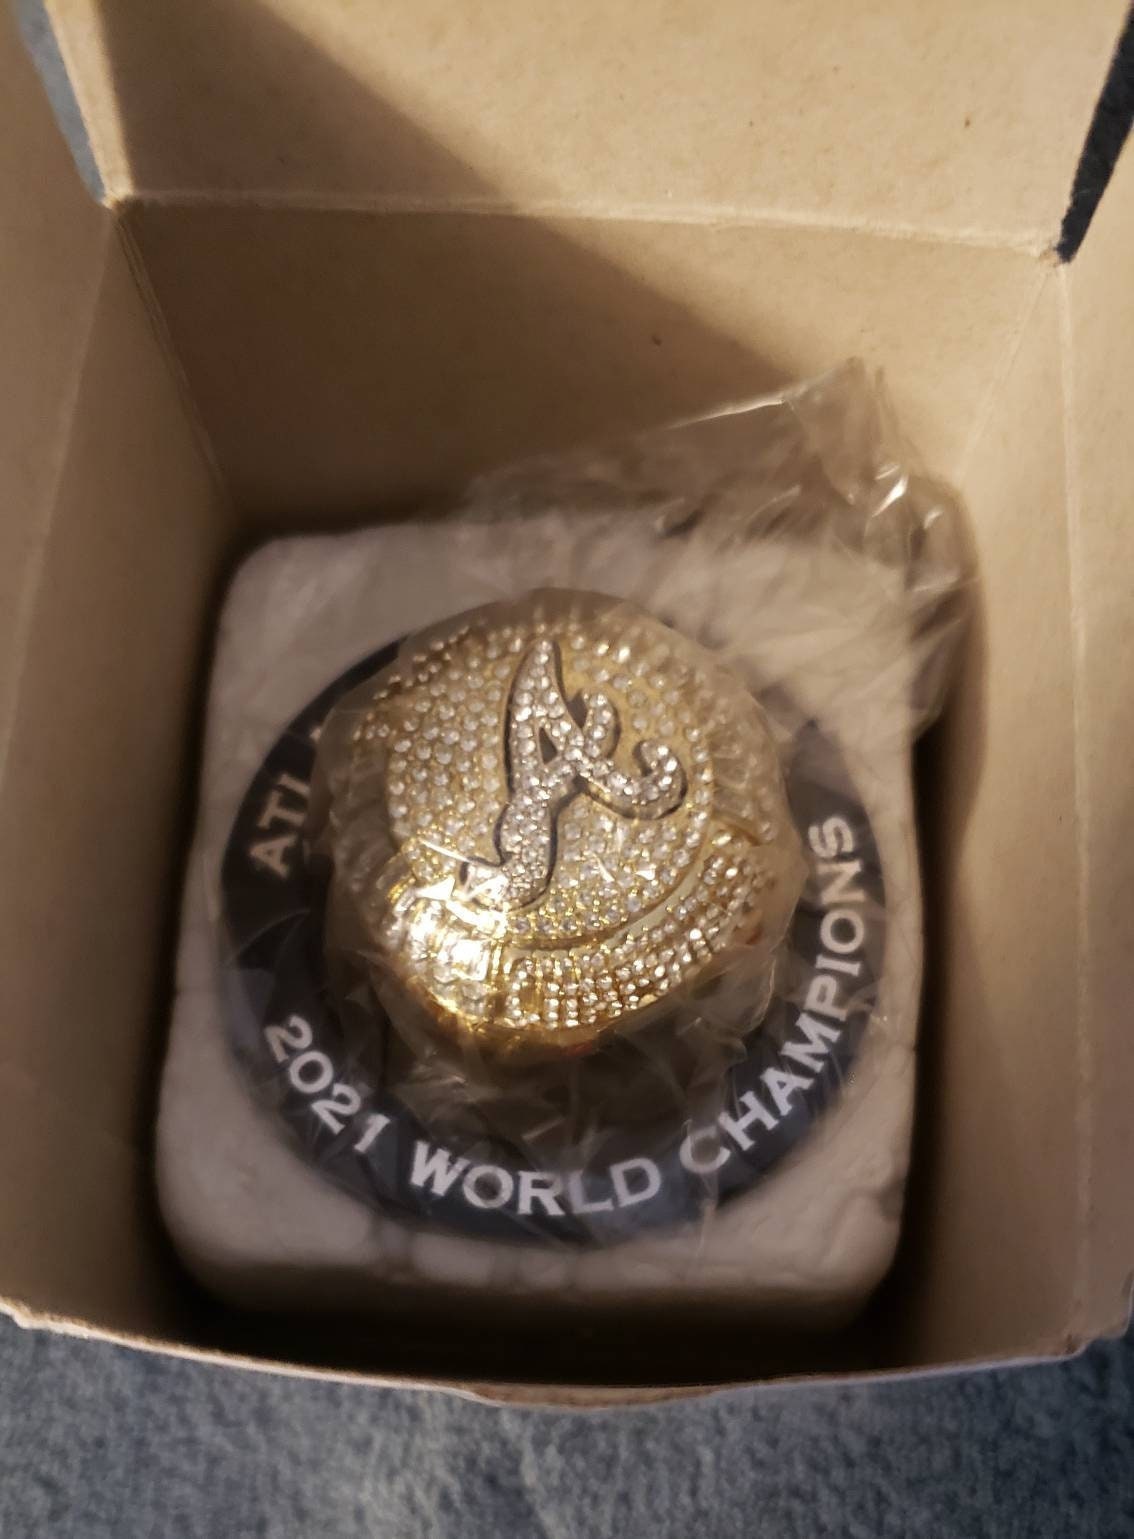 An Atlanta Braves fan shows off a replica World Series ring that